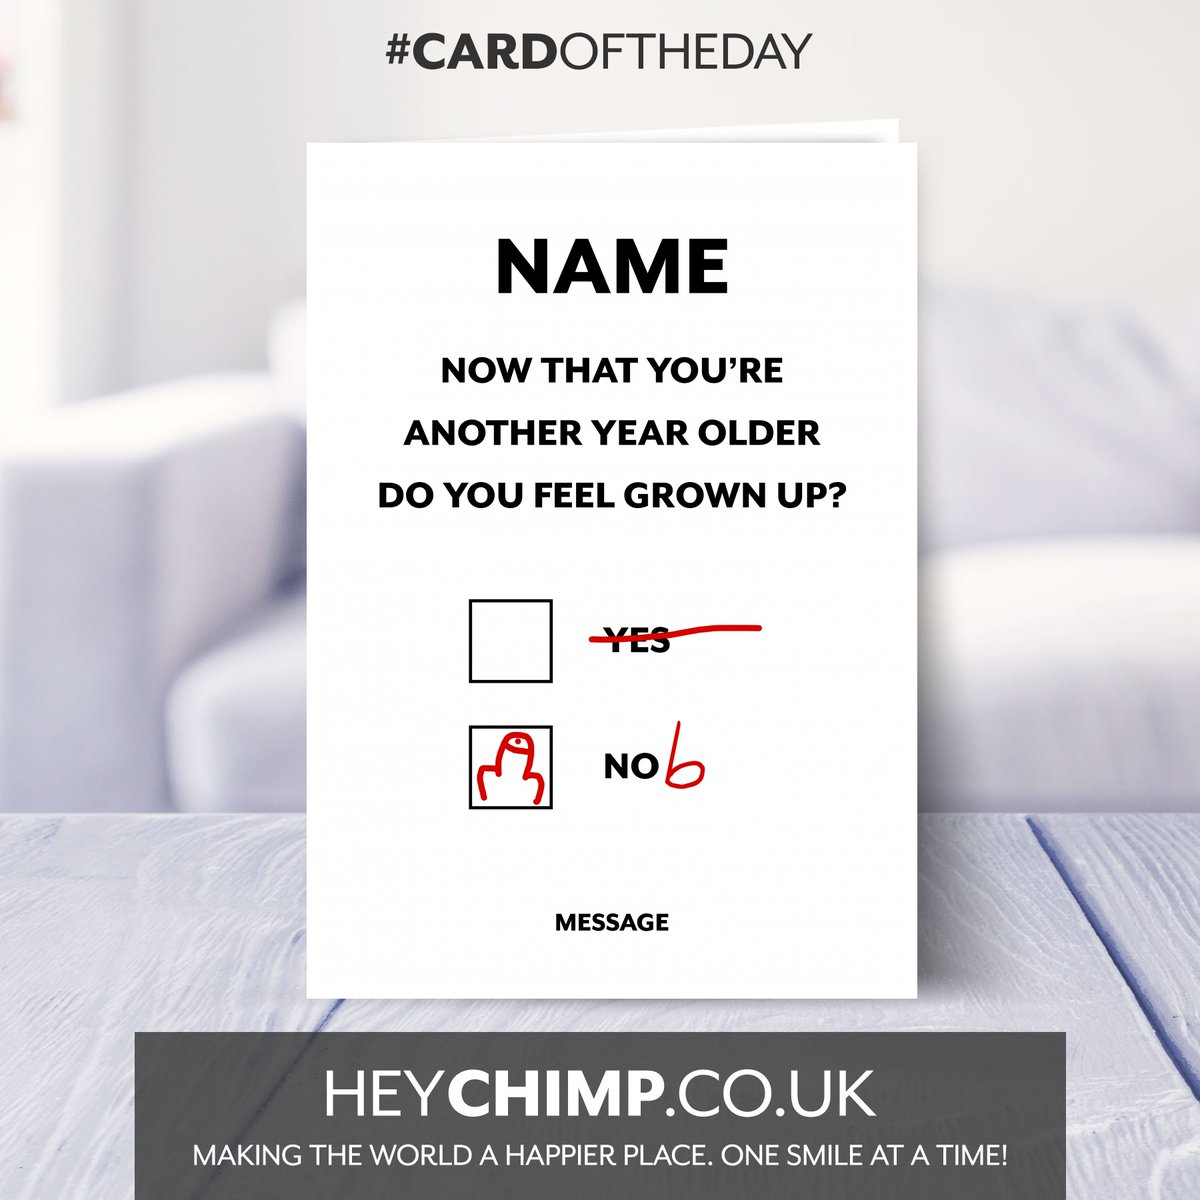 Personalised Silly Birthday Card - Do you feel grown up? #cardoftheday #adultcards #birthdaycards #funnycards #greetingscards #personalisedcards #smallbusiness #familybusiness #heychimp